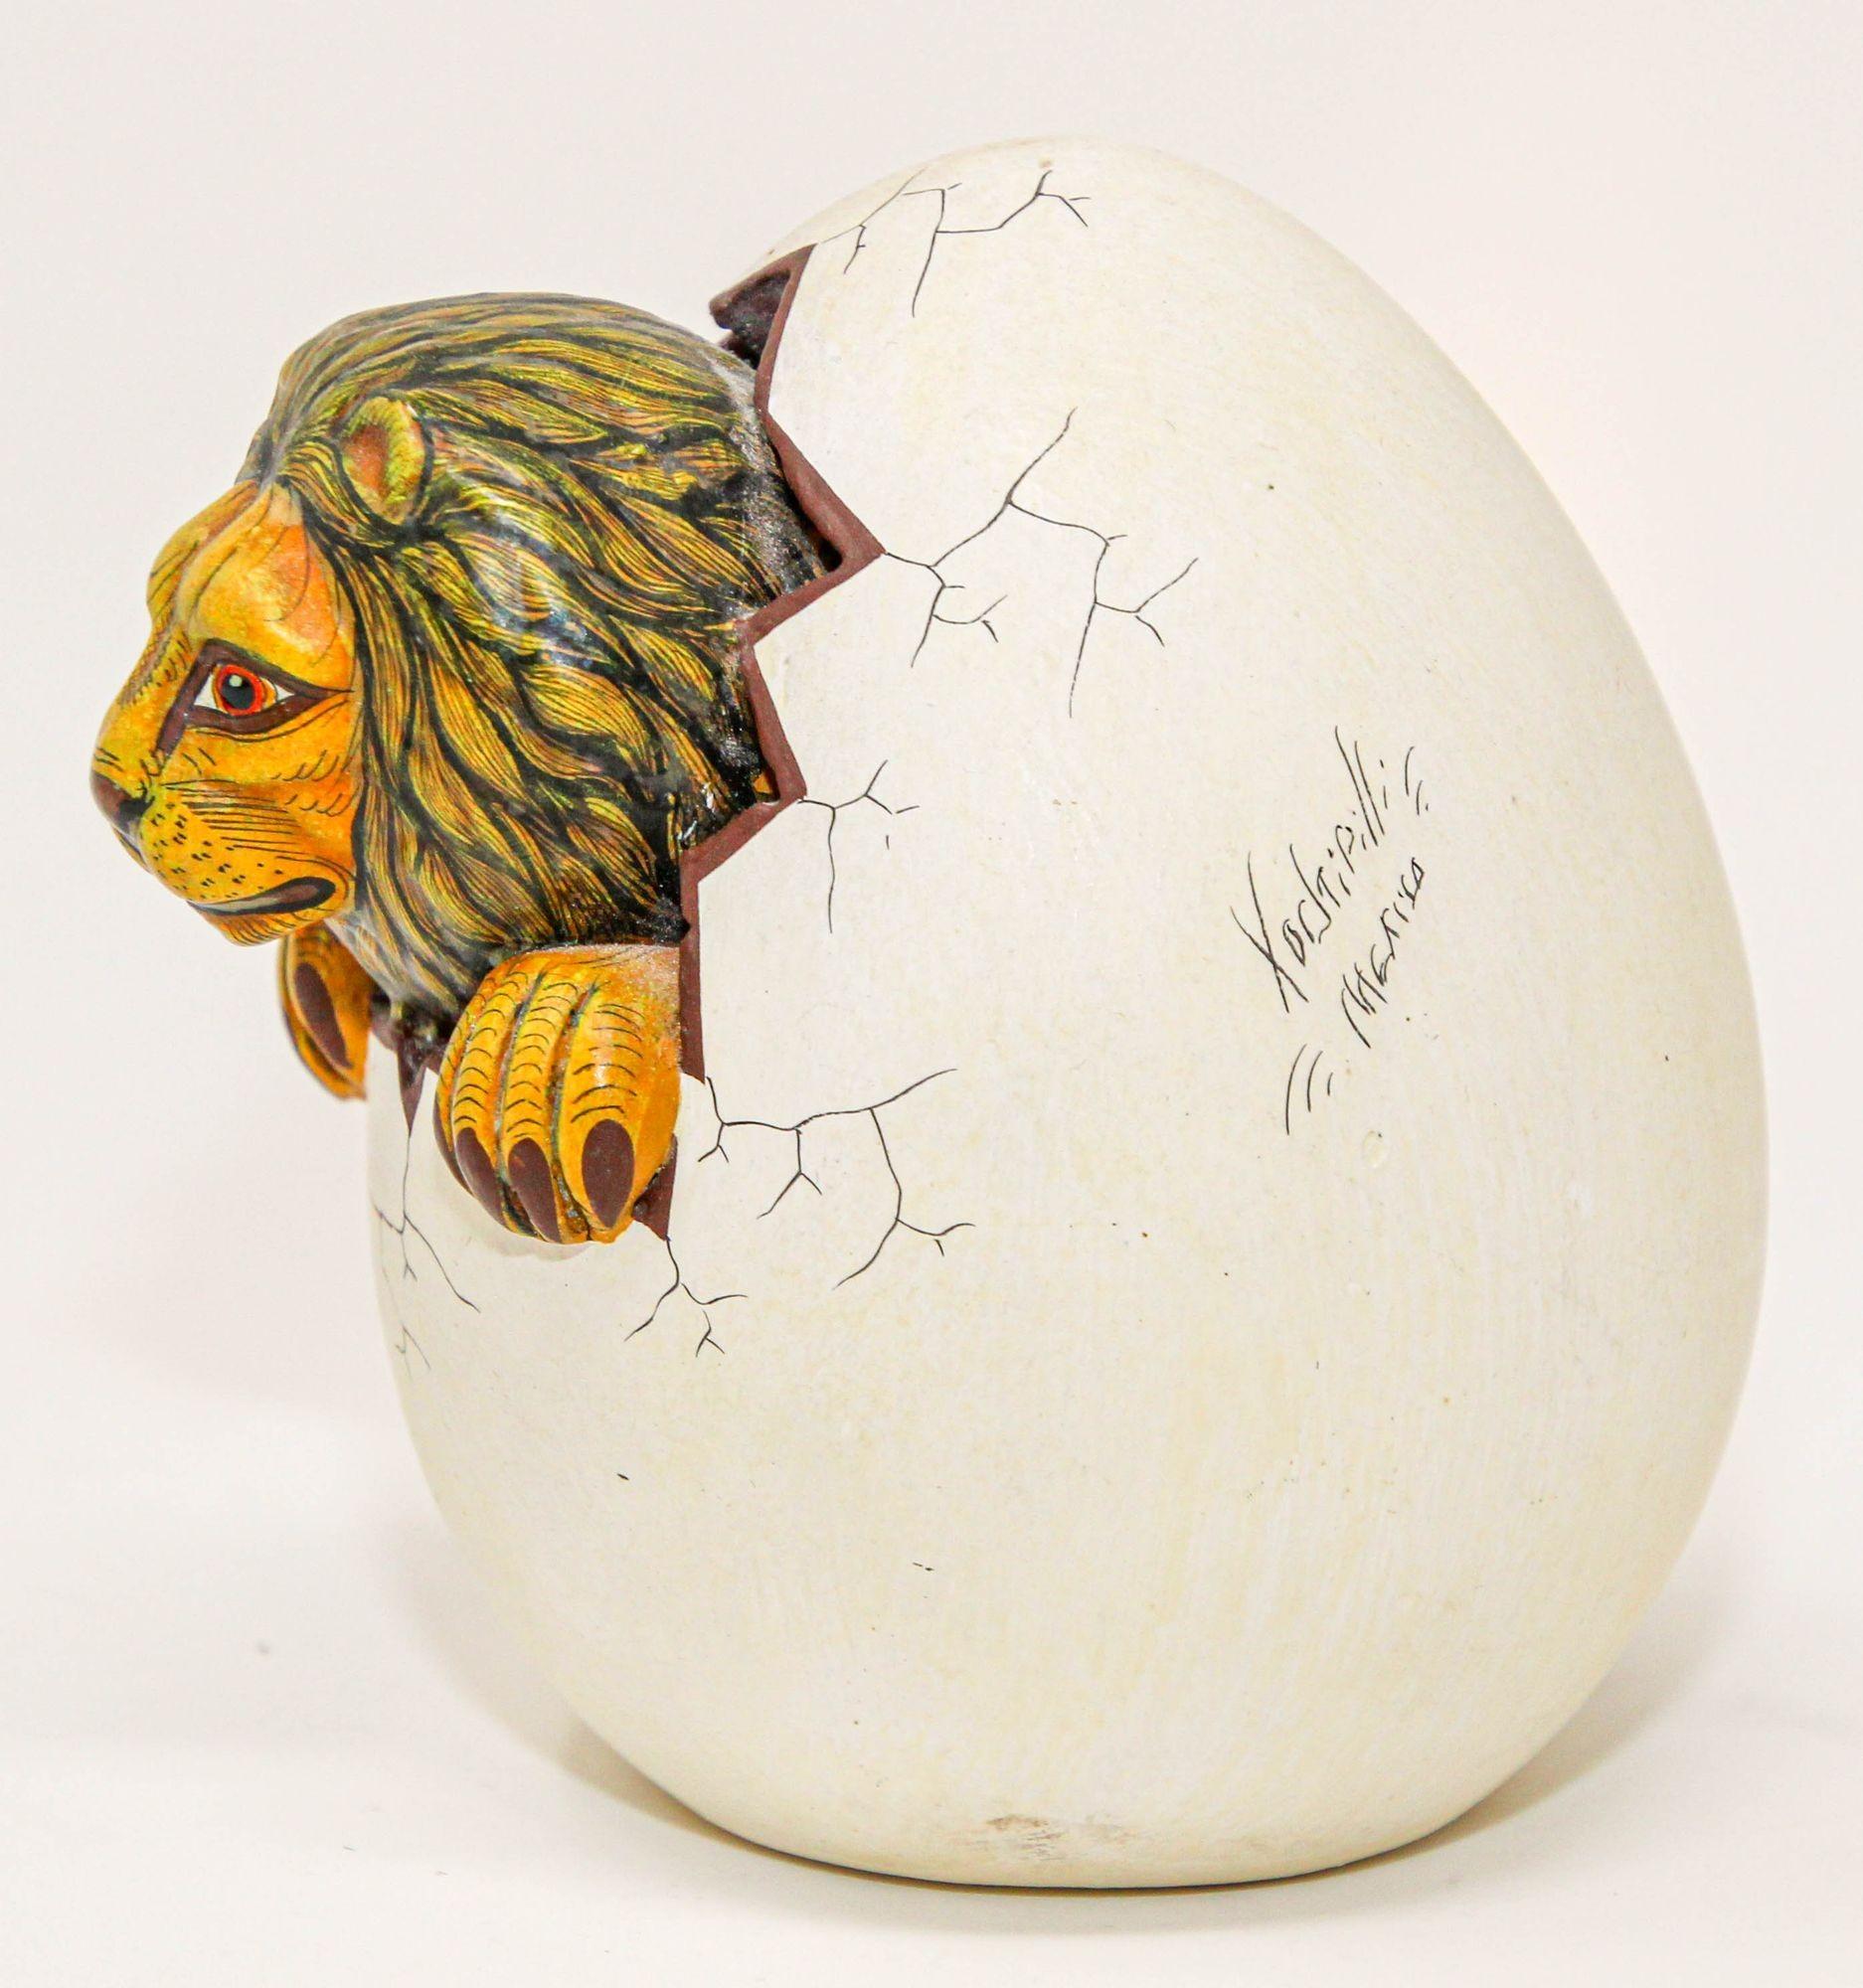 Small ceramic art sculpture with a lion in egg hatching.
Small realistic lion hatching egg sculpture.
It is clay base ceramic and hand painted in vibrant colors, realistic and intricate high quality and detailed designs on the lion. 
There are